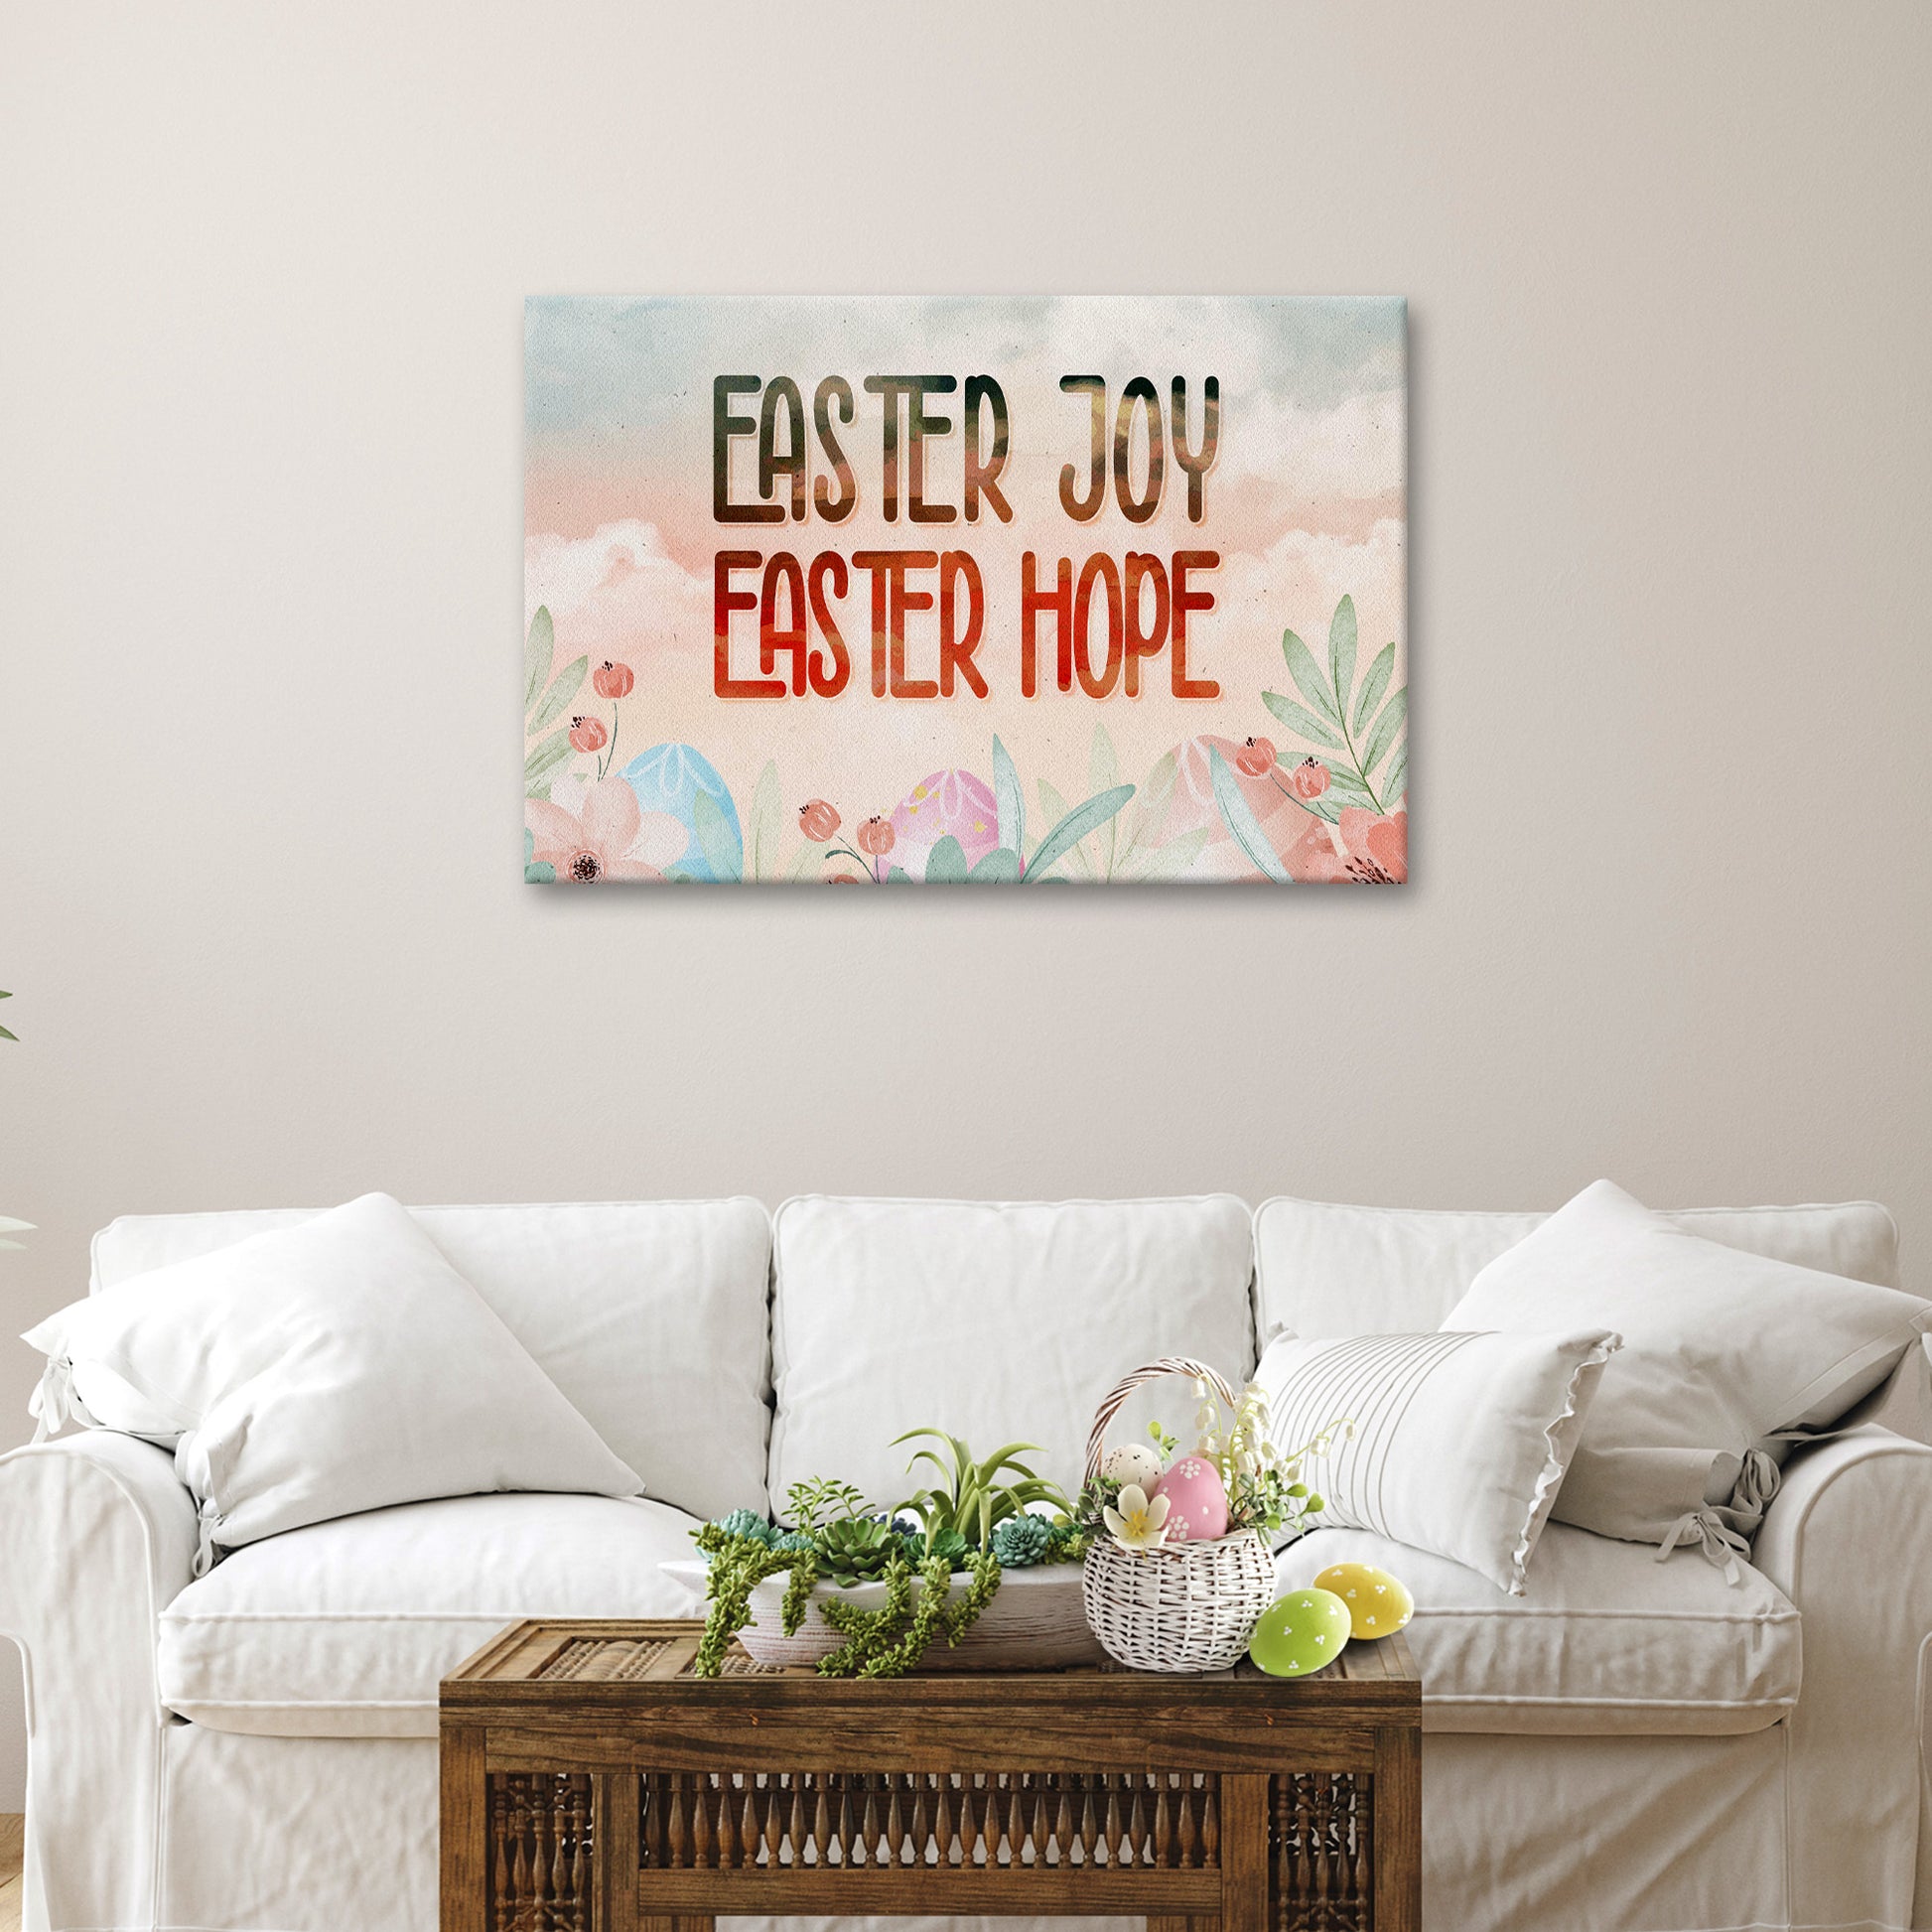 Easter Joy, Easter Hope Sign - Image by Tailored Canvases